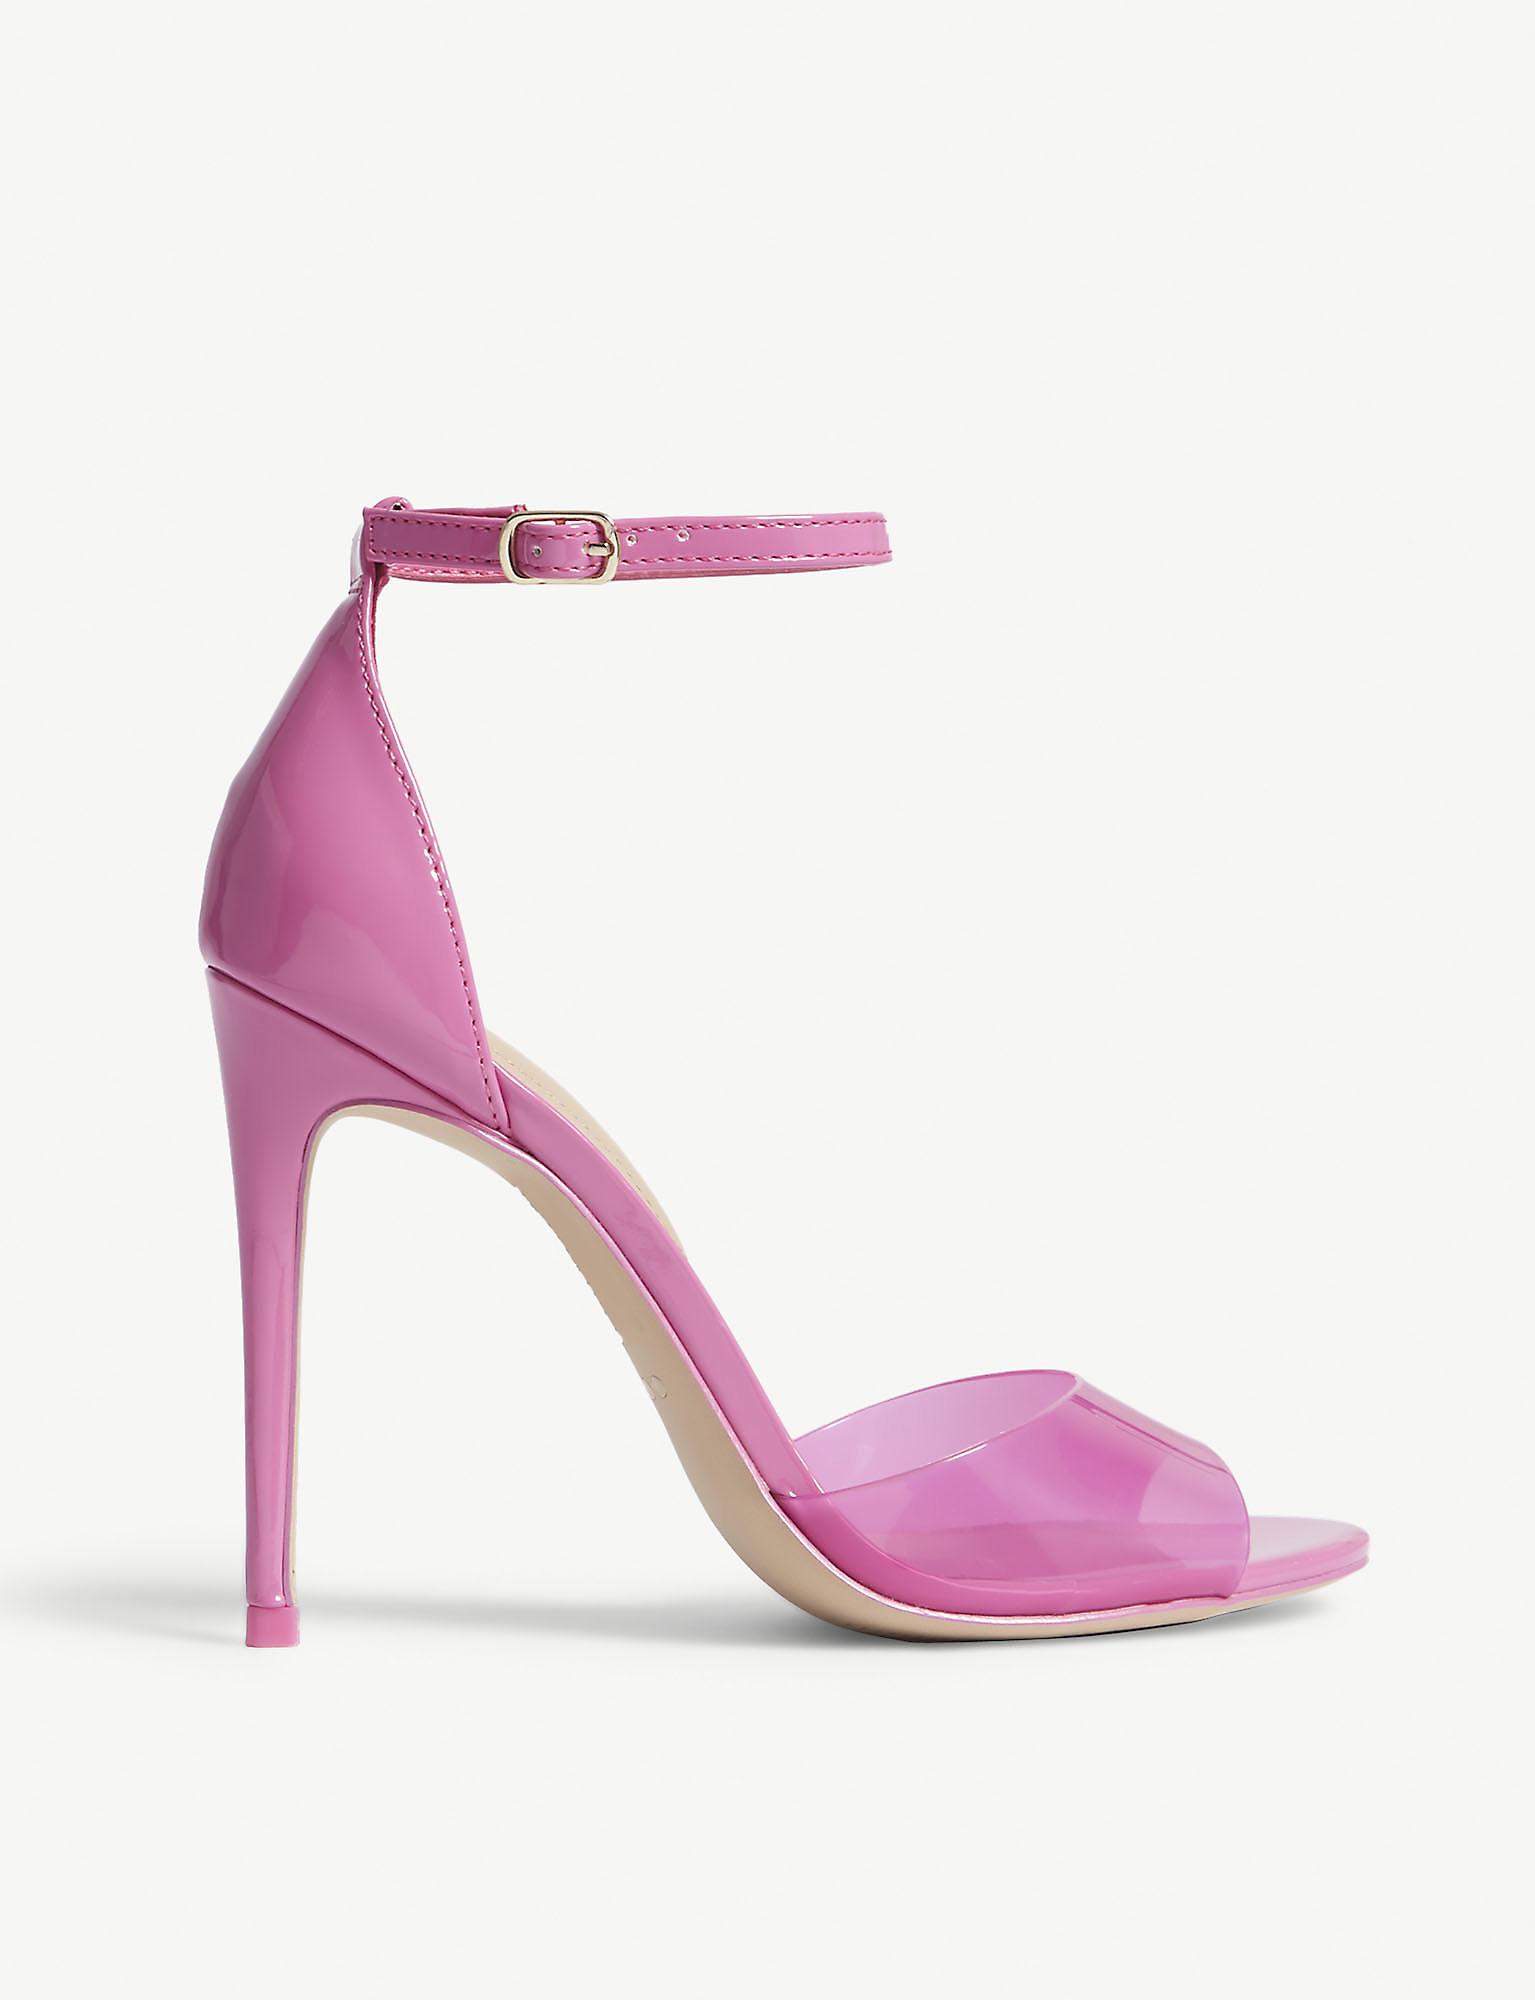 ALDO Synthetic Ligoria High Sandals in Light Pink (Pink) - Lyst